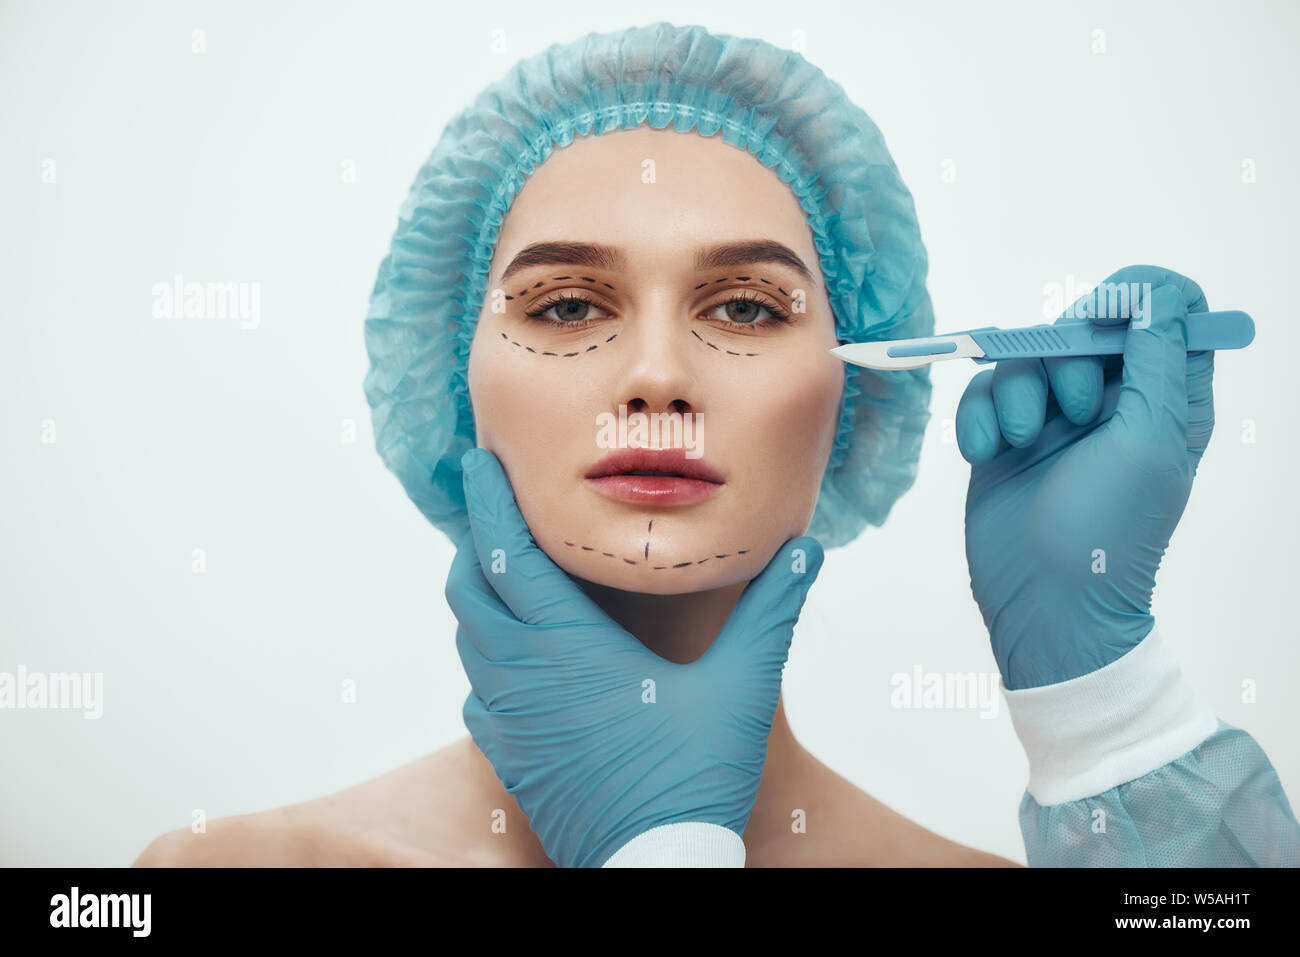 Face lift surgery. Portrait of beautiful young woman in blue medical hat having cosmetic face surgery. Plastic surgeon in blue gloves holding scalpel. Beauty concept Stock Photo